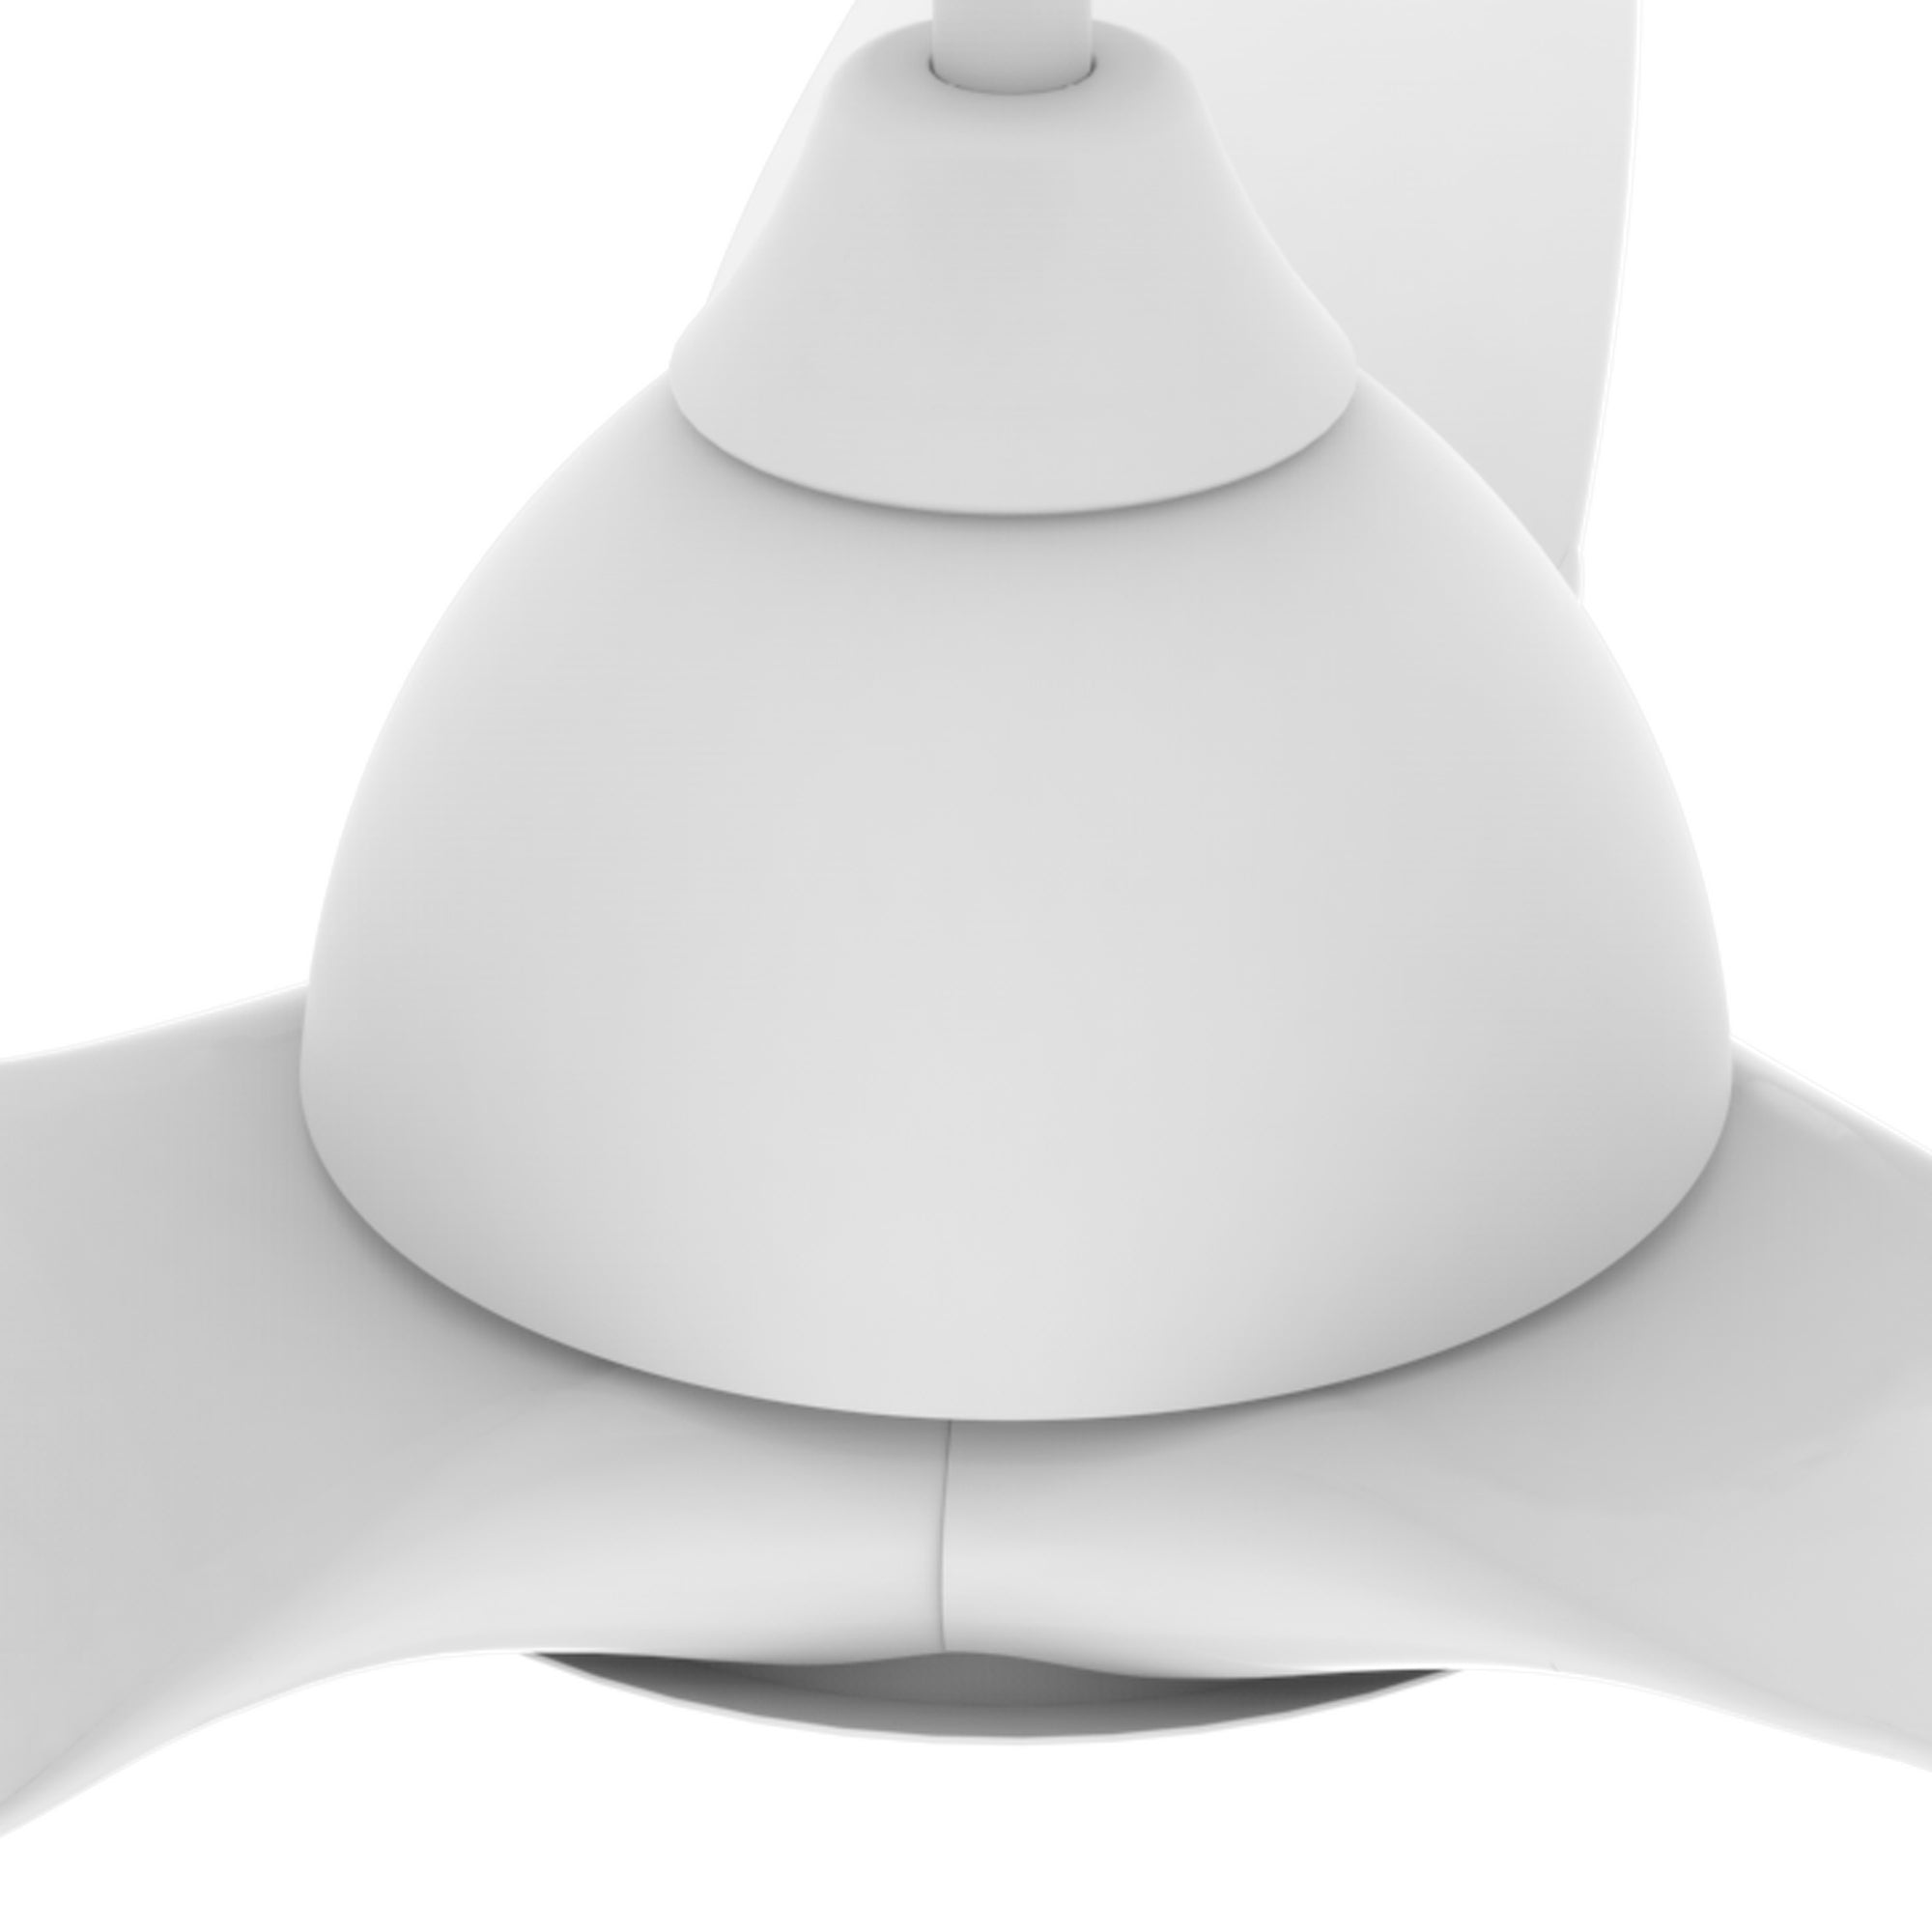 The Smafan Cresta 52&#39;&#39; smart ceiling fan keeps your space cool, bright, and stylish. It is a soft modern masterpiece perfect for your large indoor living spaces. This Wifi smart ceiling fan is a simplicity designing with Black finish, use ABS blades and has an integrated 4000K LED daylight. The fan features Remote control, Wi-Fi apps, Siri Shortcut and Voice control technology (compatible with Amazon Alexa and Google Home Assistant ) to set fan preferences. 